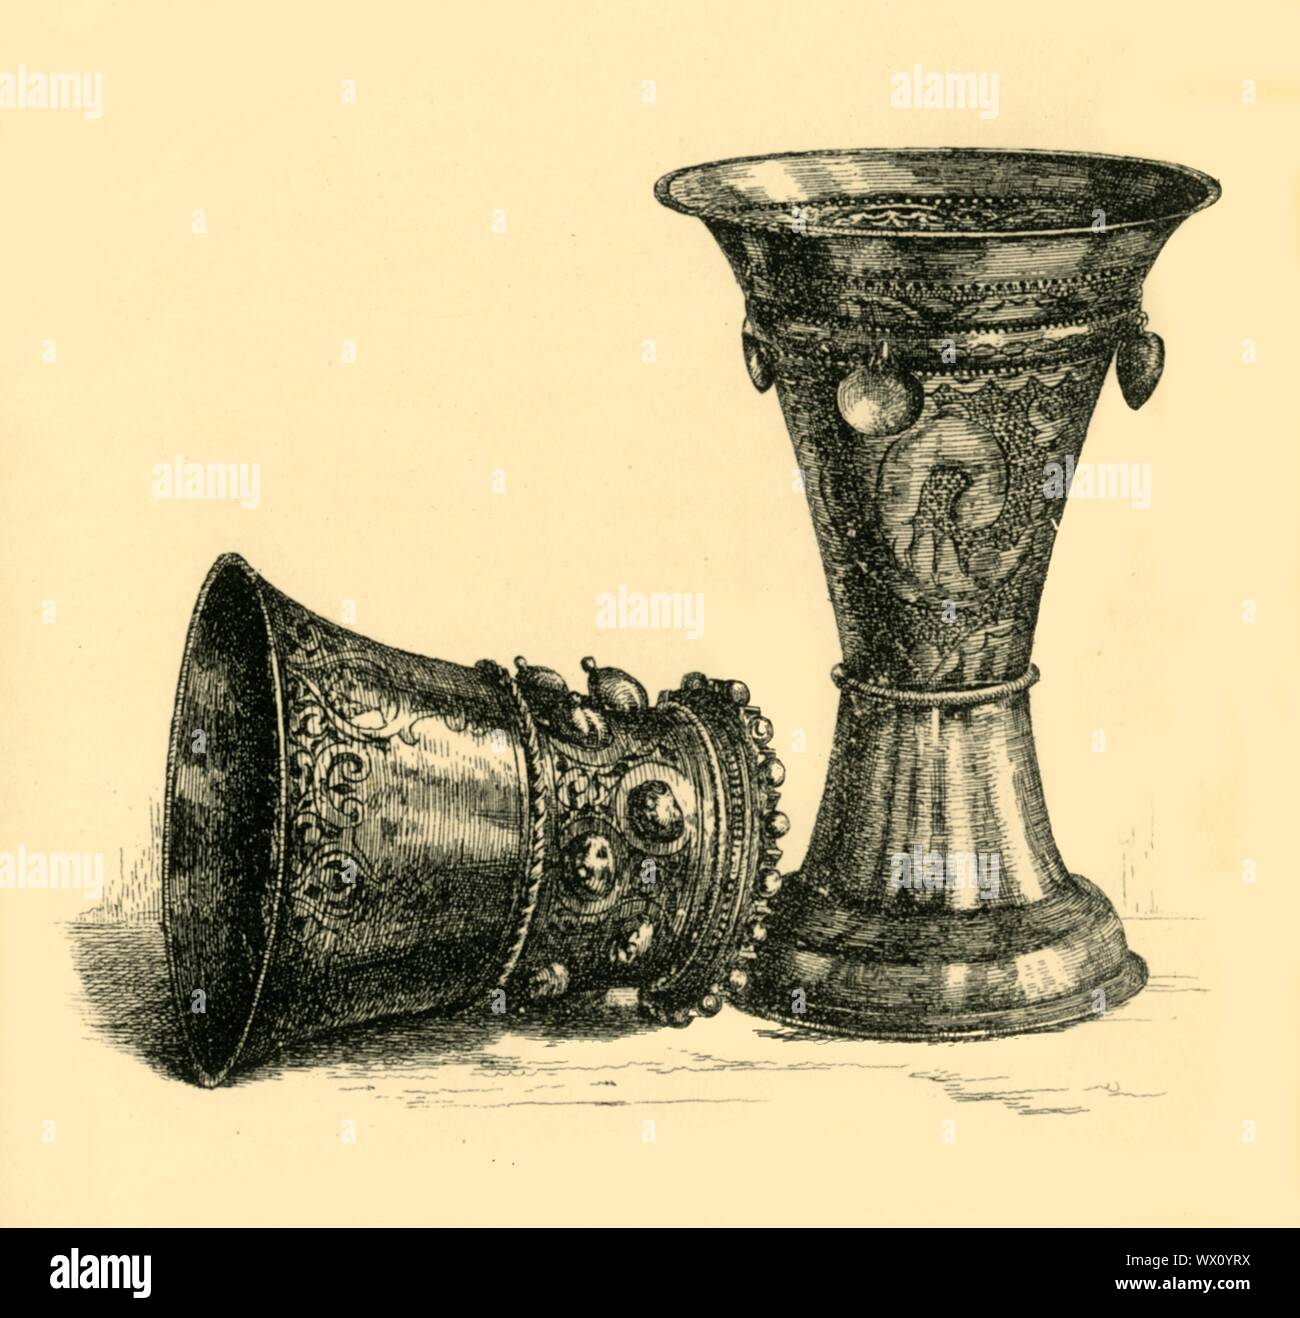 Two silver cups, 17th century?, (1881). Etching of two silver-gilt drinking cups or beakers. The one on the left was made c1600 in Wesel in the German Rhineland. The inspiration for the shape is a 16th-century glass drinking vessel called a 'romer'.  The raised knobs (called 'prunts') on the lower half mimic the decoration which forms naturally in the handling molten glass. From &quot;The South Kensington Museum&quot;, a book of engraved illustrations, with descriptions, of the works of art in the collection of the Victoria &amp; Albert Museum in London (formerly known as the South Kensington Stock Photo